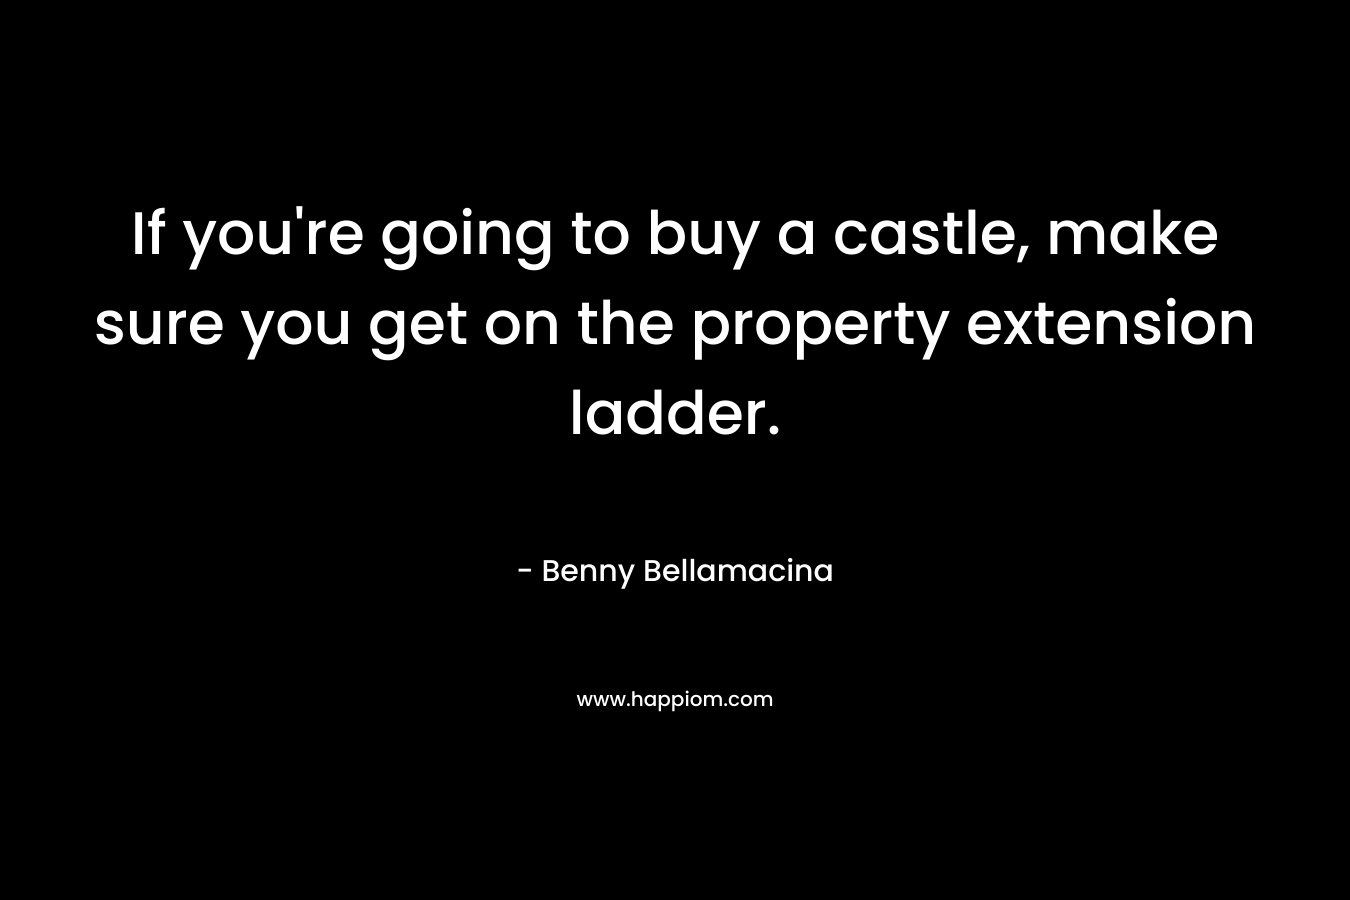 If you’re going to buy a castle, make sure you get on the property extension ladder. – Benny Bellamacina